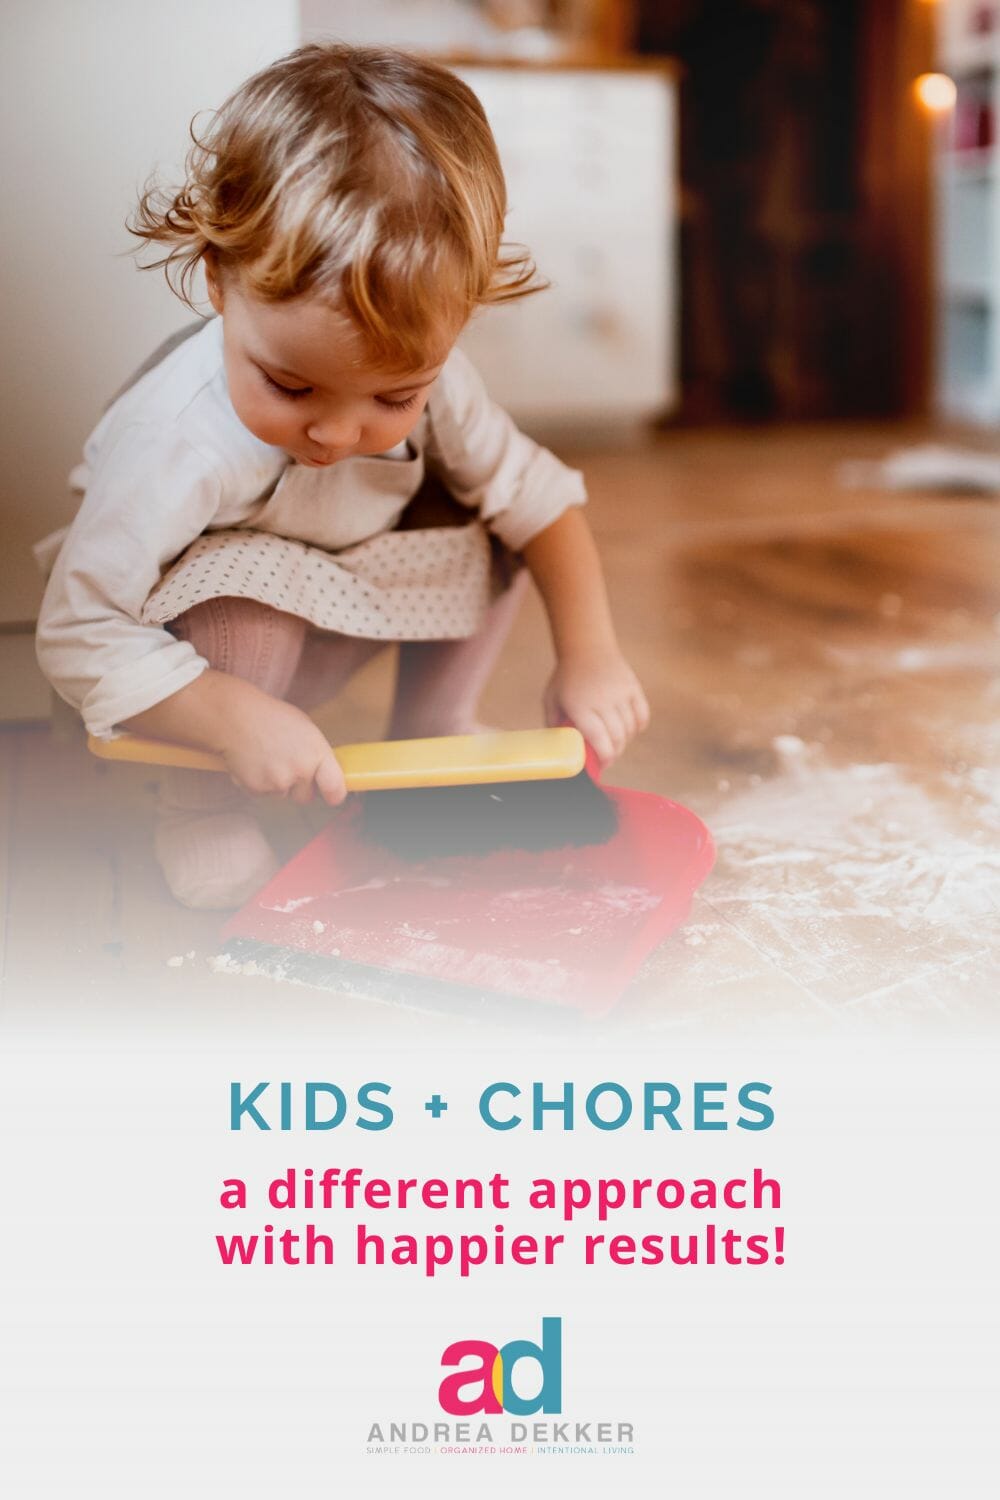 Stop stressing out about kids' chores and instead, get them excited to work together to create a clean and fun space to hang out together. via @andreadekker